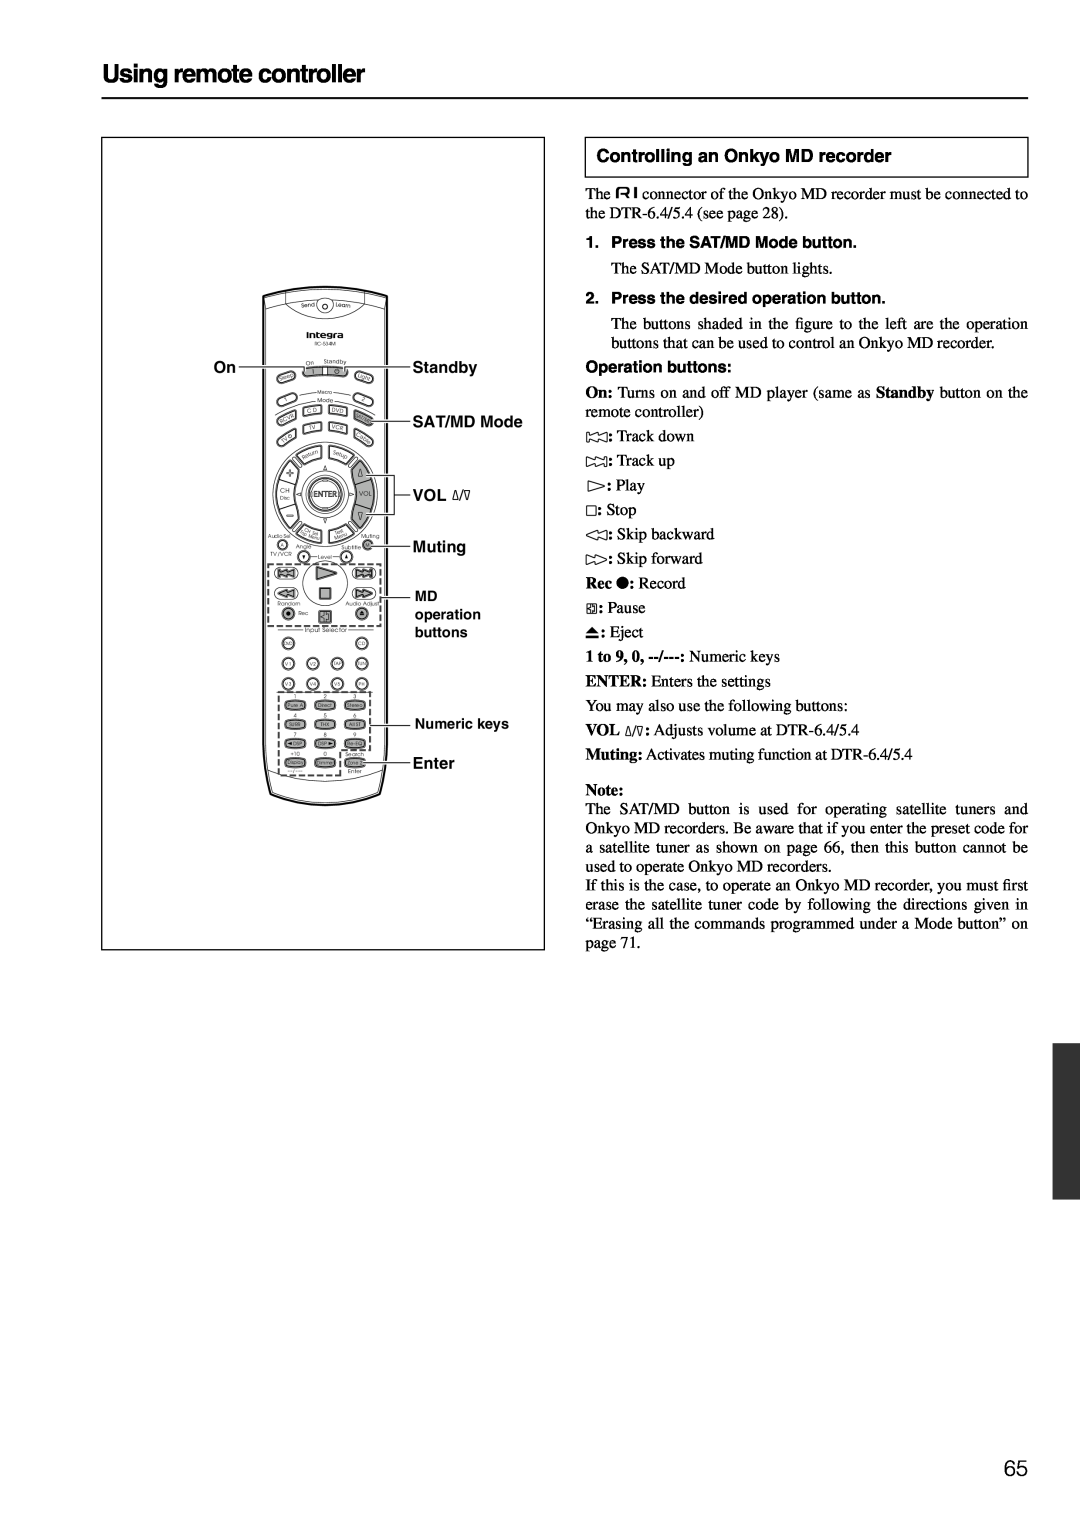 Integra DTR-6.4/5.4 instruction manual Controlling an Onkyo MD recorder, Using remote controller, Rec : Record 